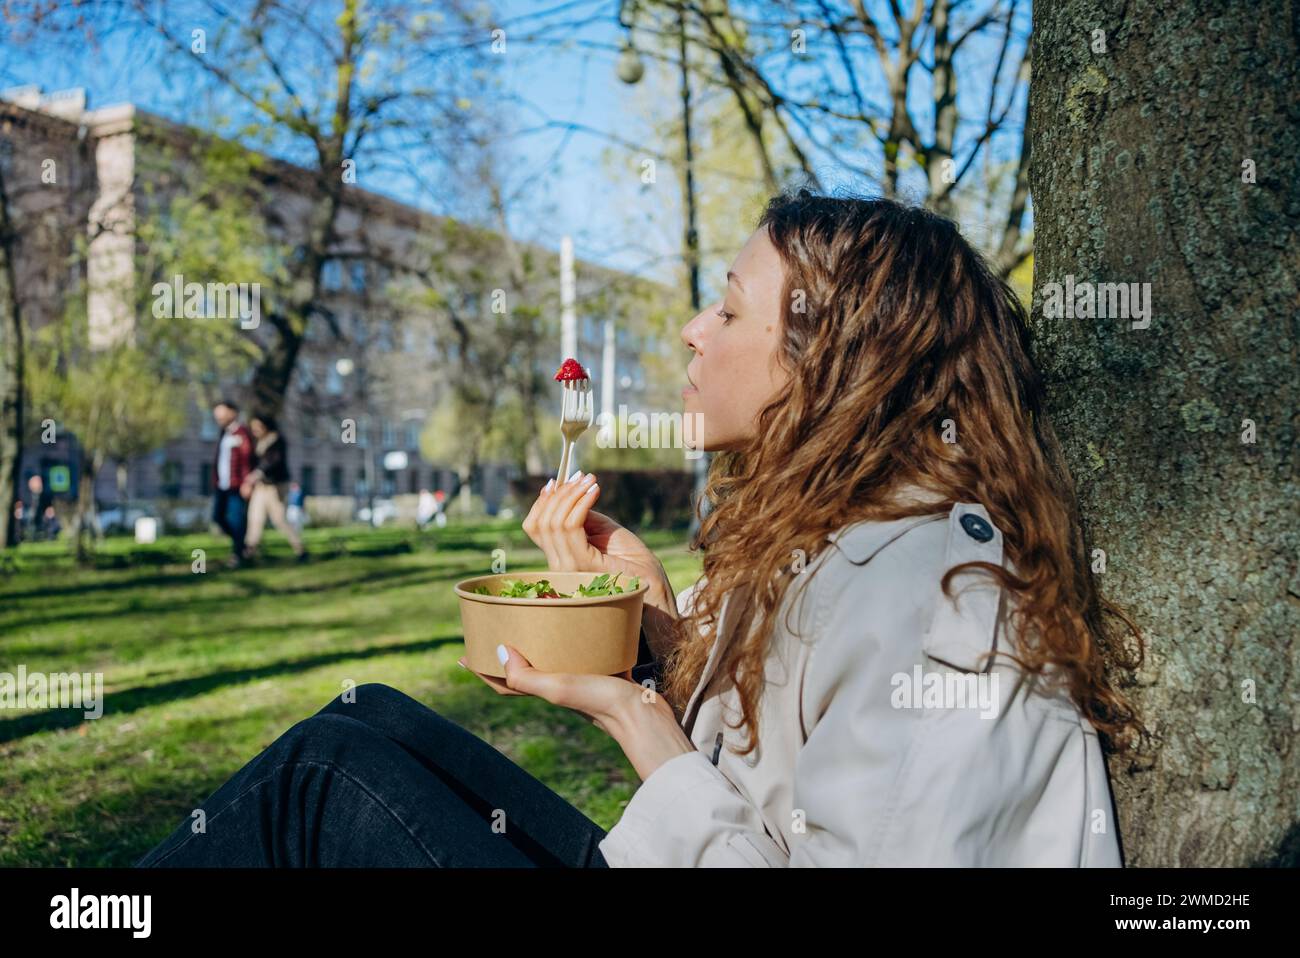 A young woman savors a bite of strawberry atop her salad, sitting serenely against a tree in a bustling city park. The moment captures the blend of urban life and the quest for wellness. Stock Photo